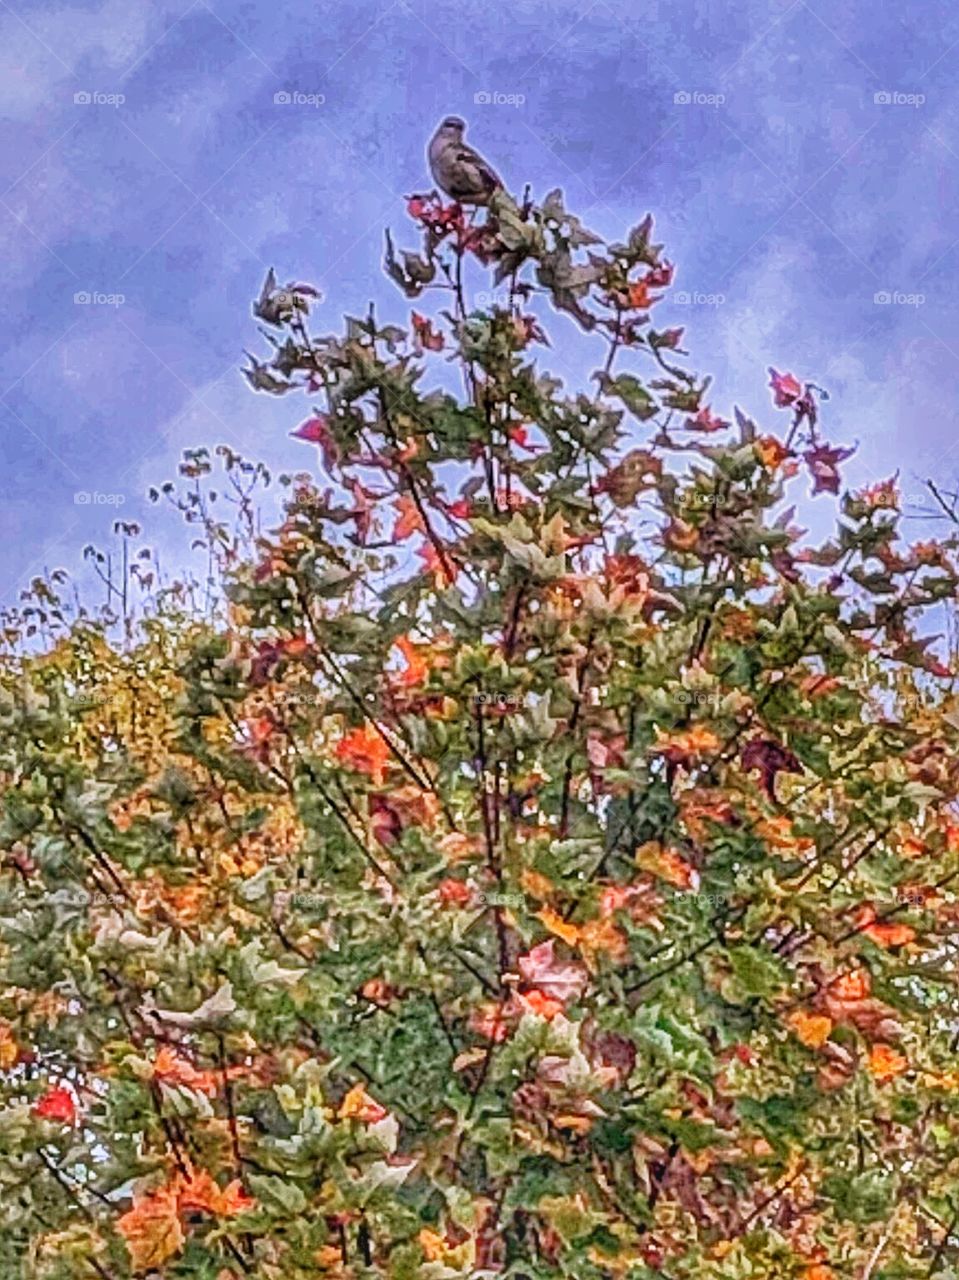 Bird sitting at the top of a tree   leaves just starting to turn birds eye view 😊